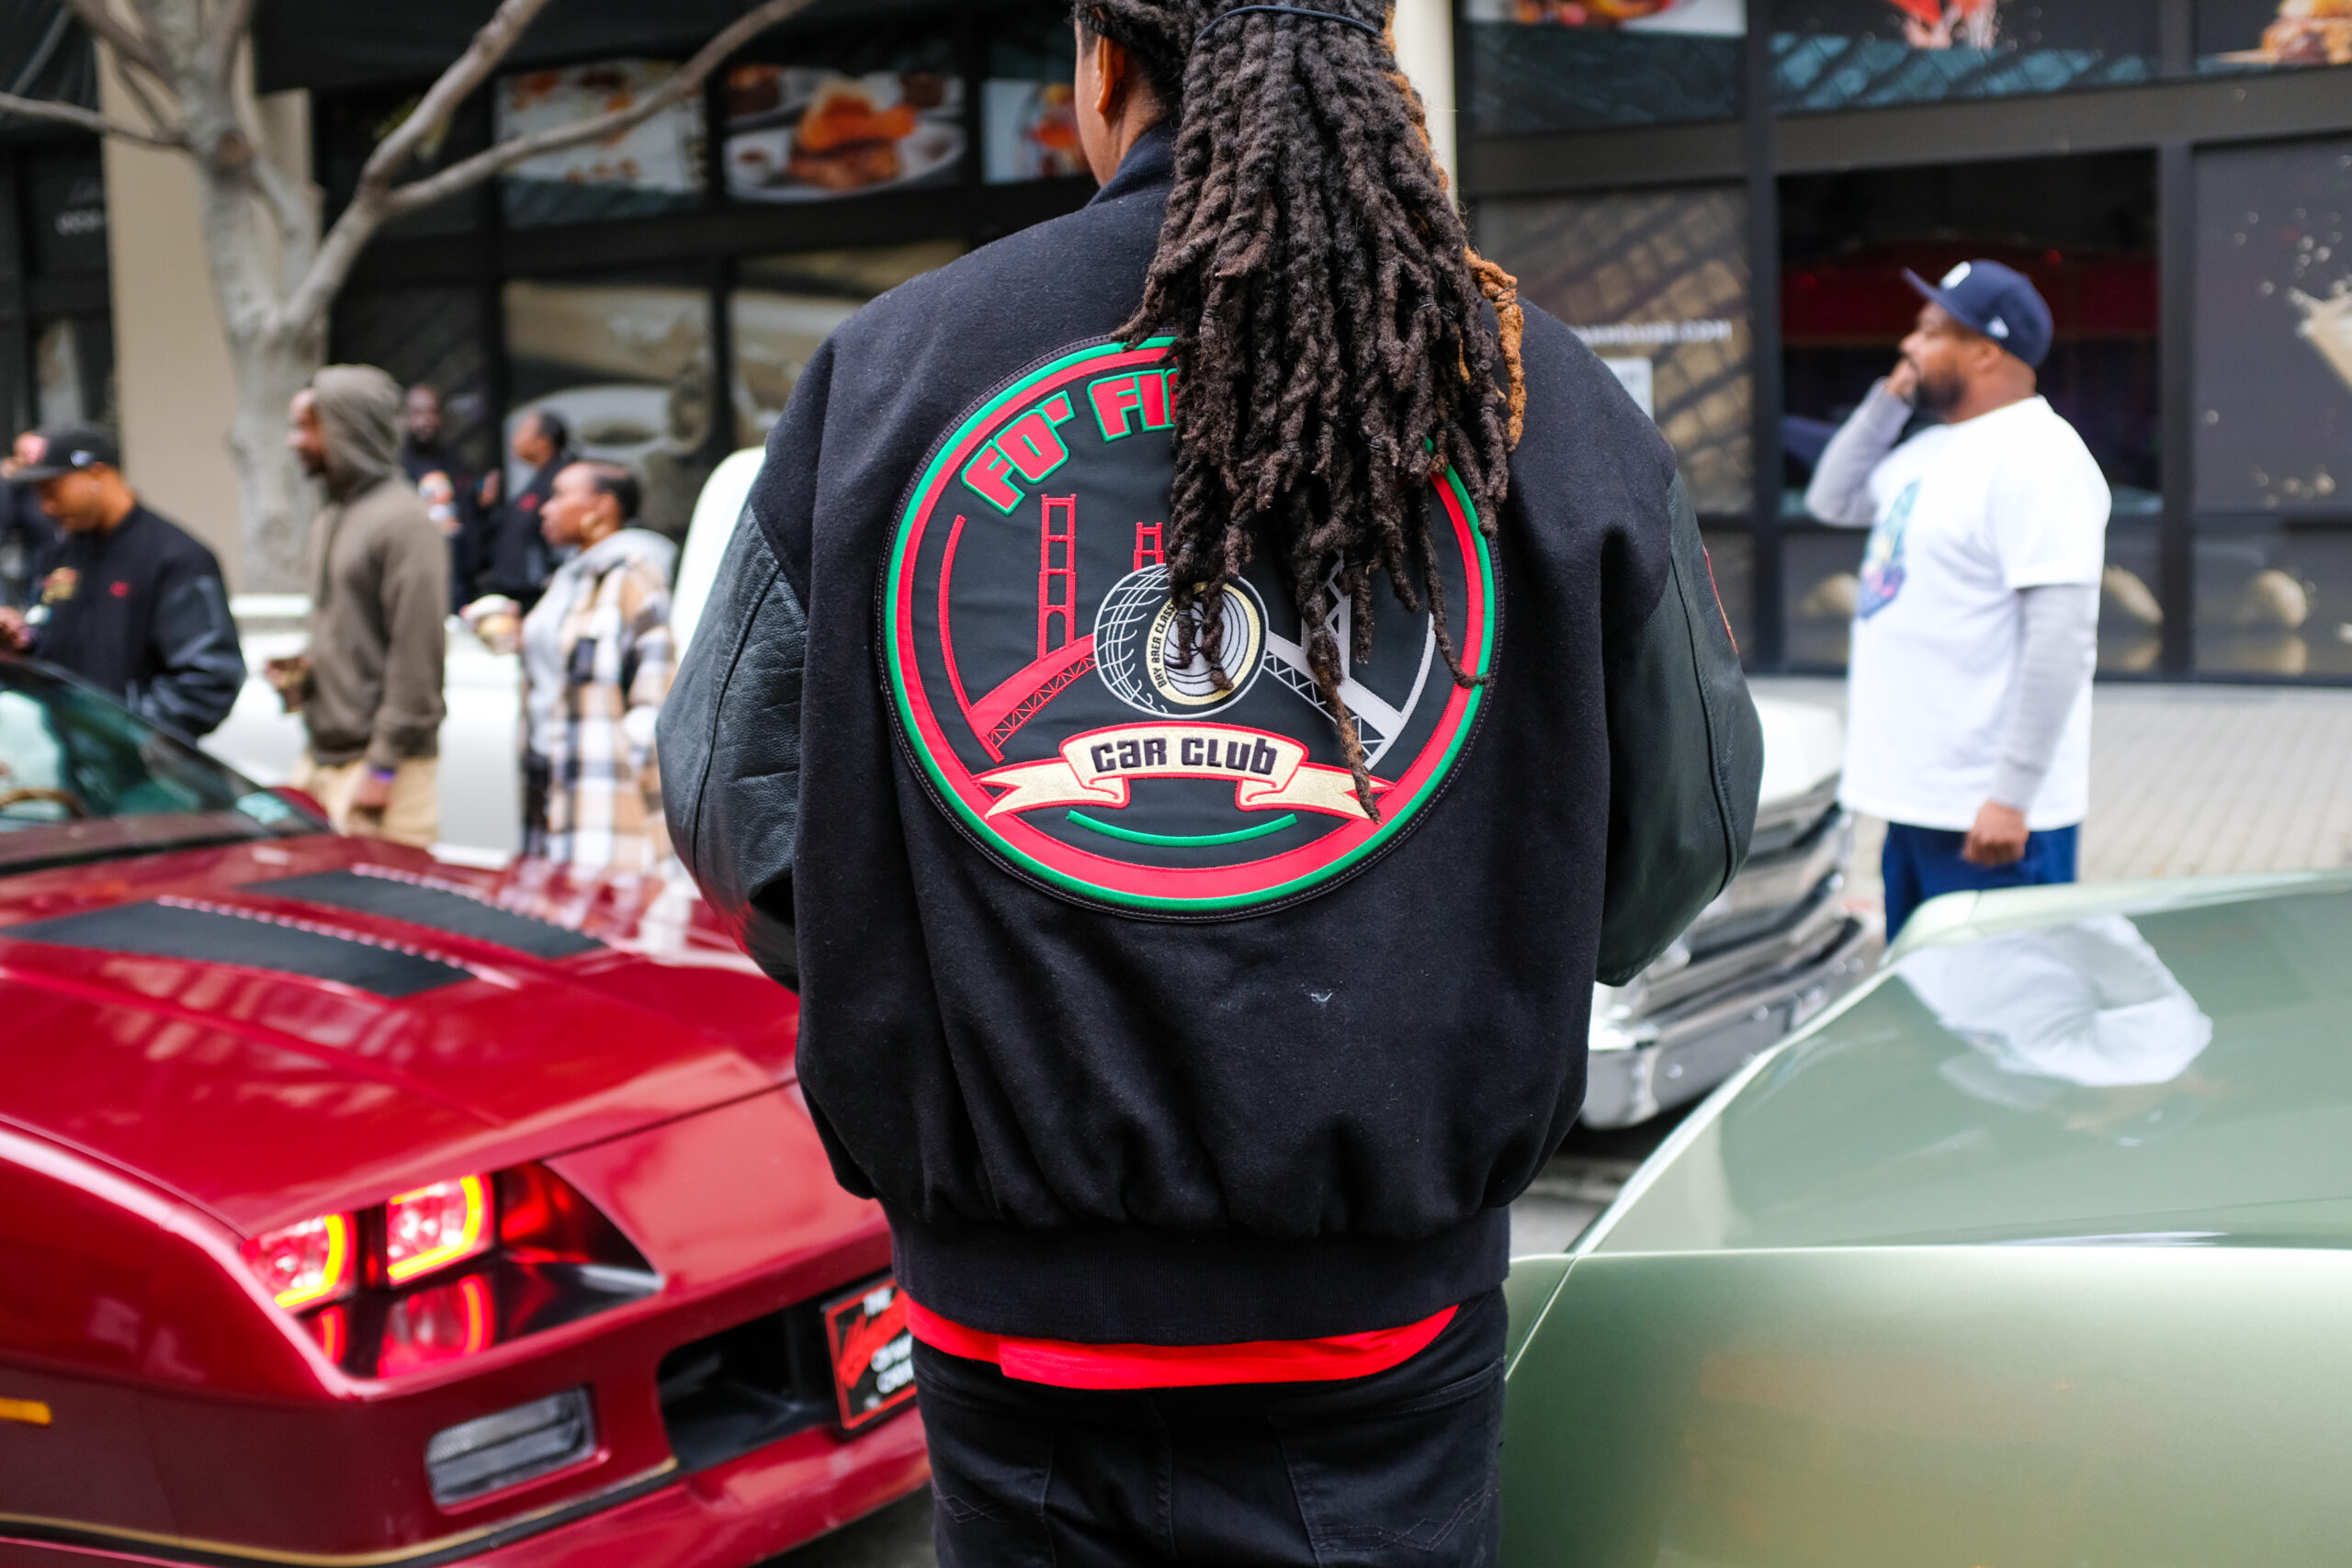 A person with dreadlocks is facing away, wearing a jacket with a car club emblem, in front of two vintage cars and onlookers.